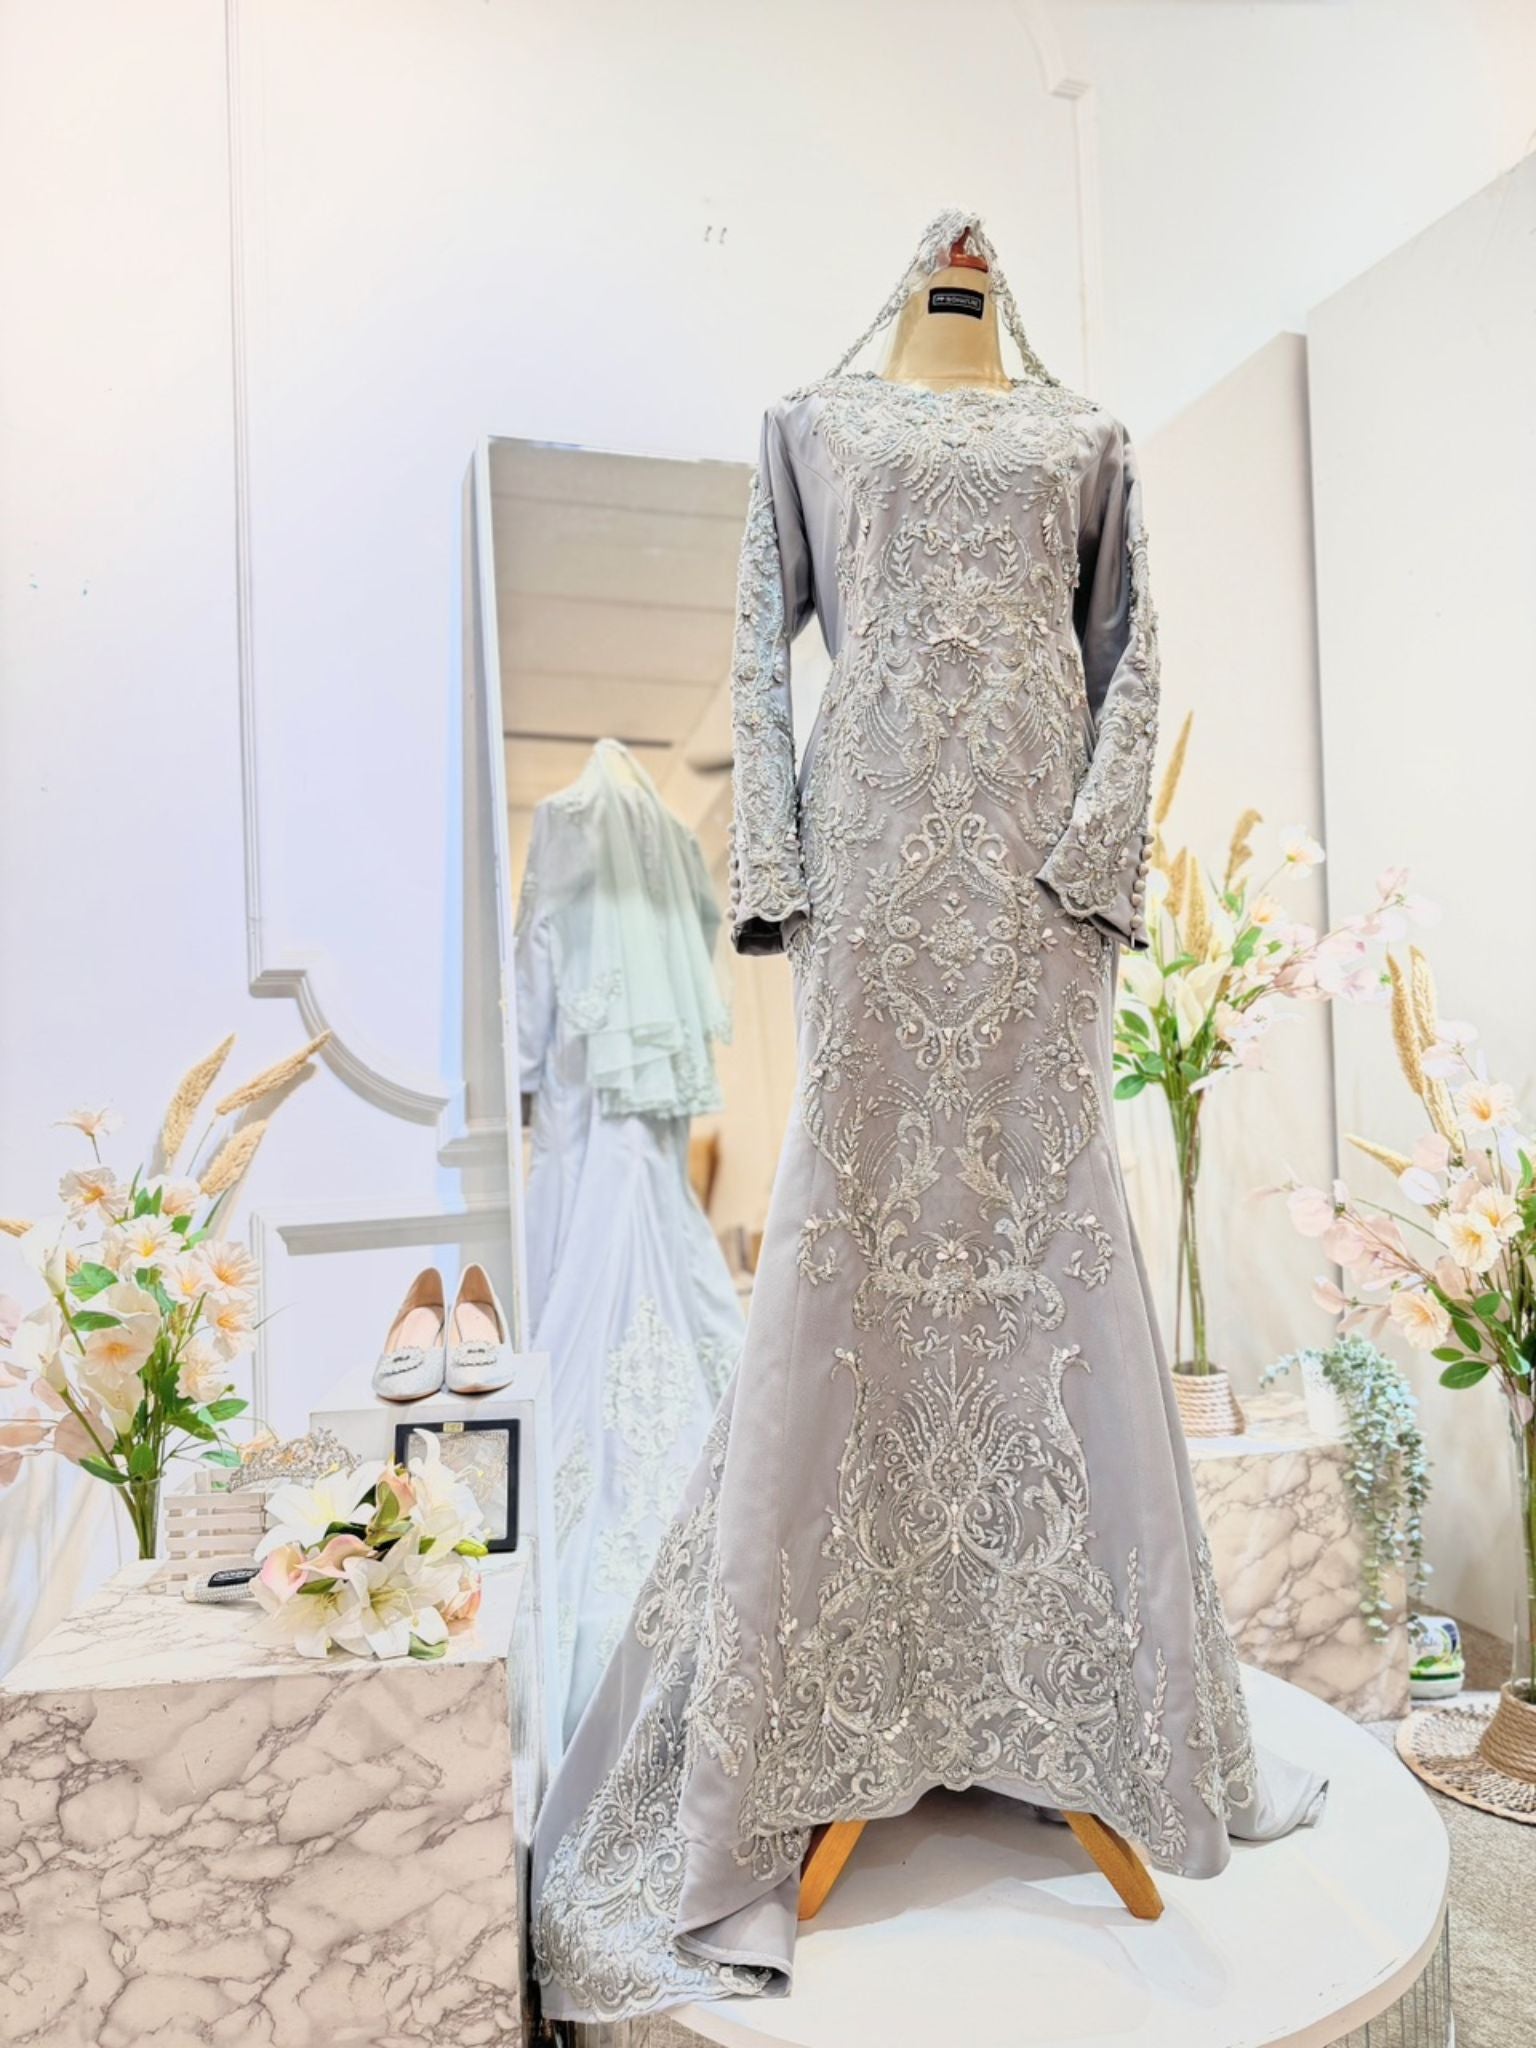 LUMIERE - Silver Grey Duchess Trumpet Dress with Lace - A stunning Baju Pengantin for Malay Weddings, featuring a trumpet dress design in elegant silver grey. Crafted from luxurious duchess fabric embellished with intricate lace detailing. Perfect for weddings and formal occasions.